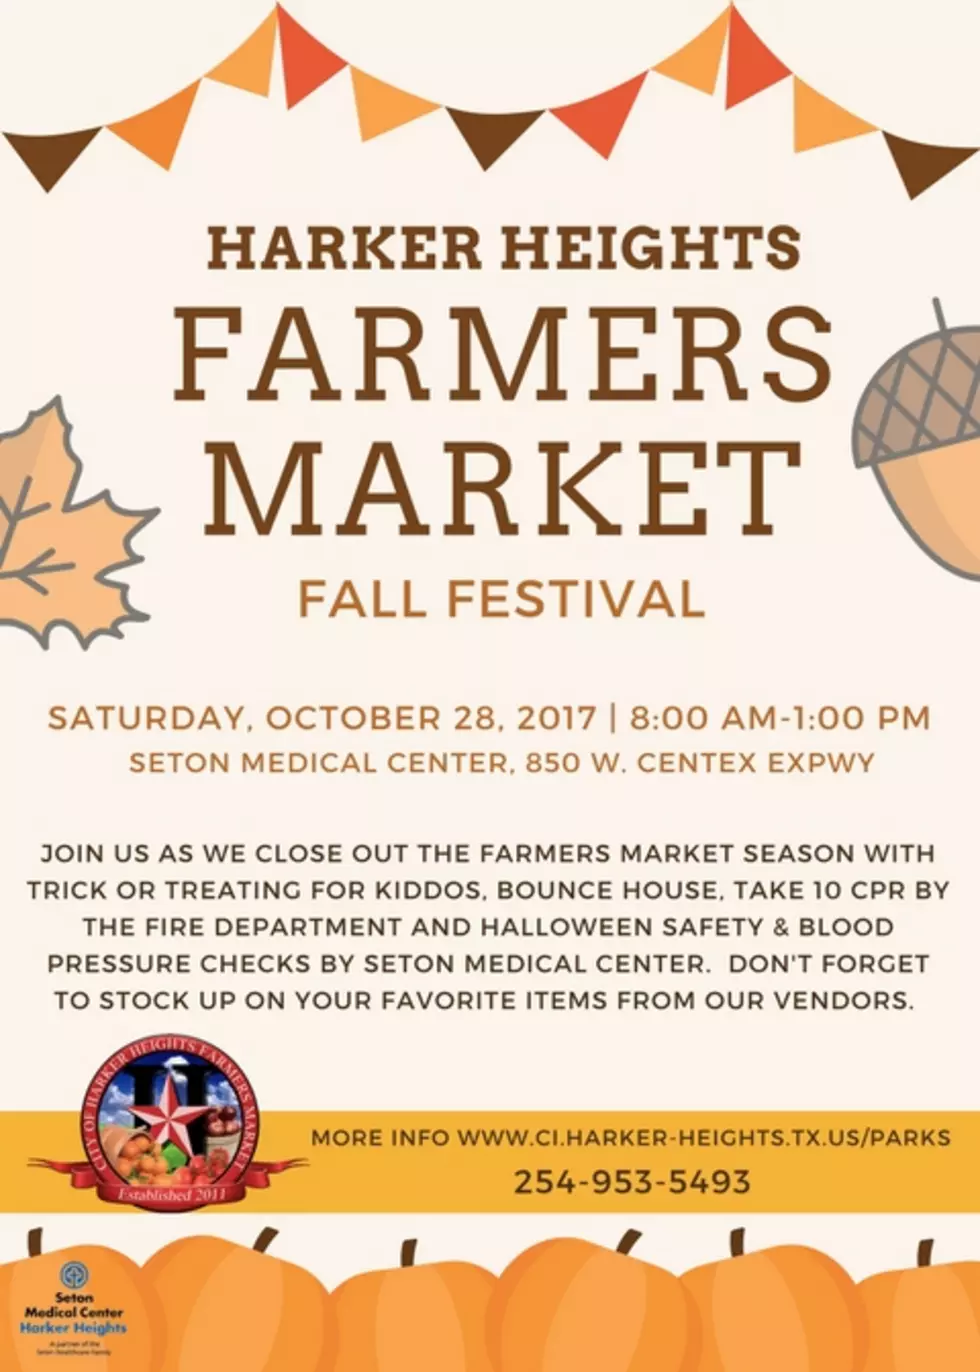 Farmers Market Season Ends with Fall Festival in Harker Heights